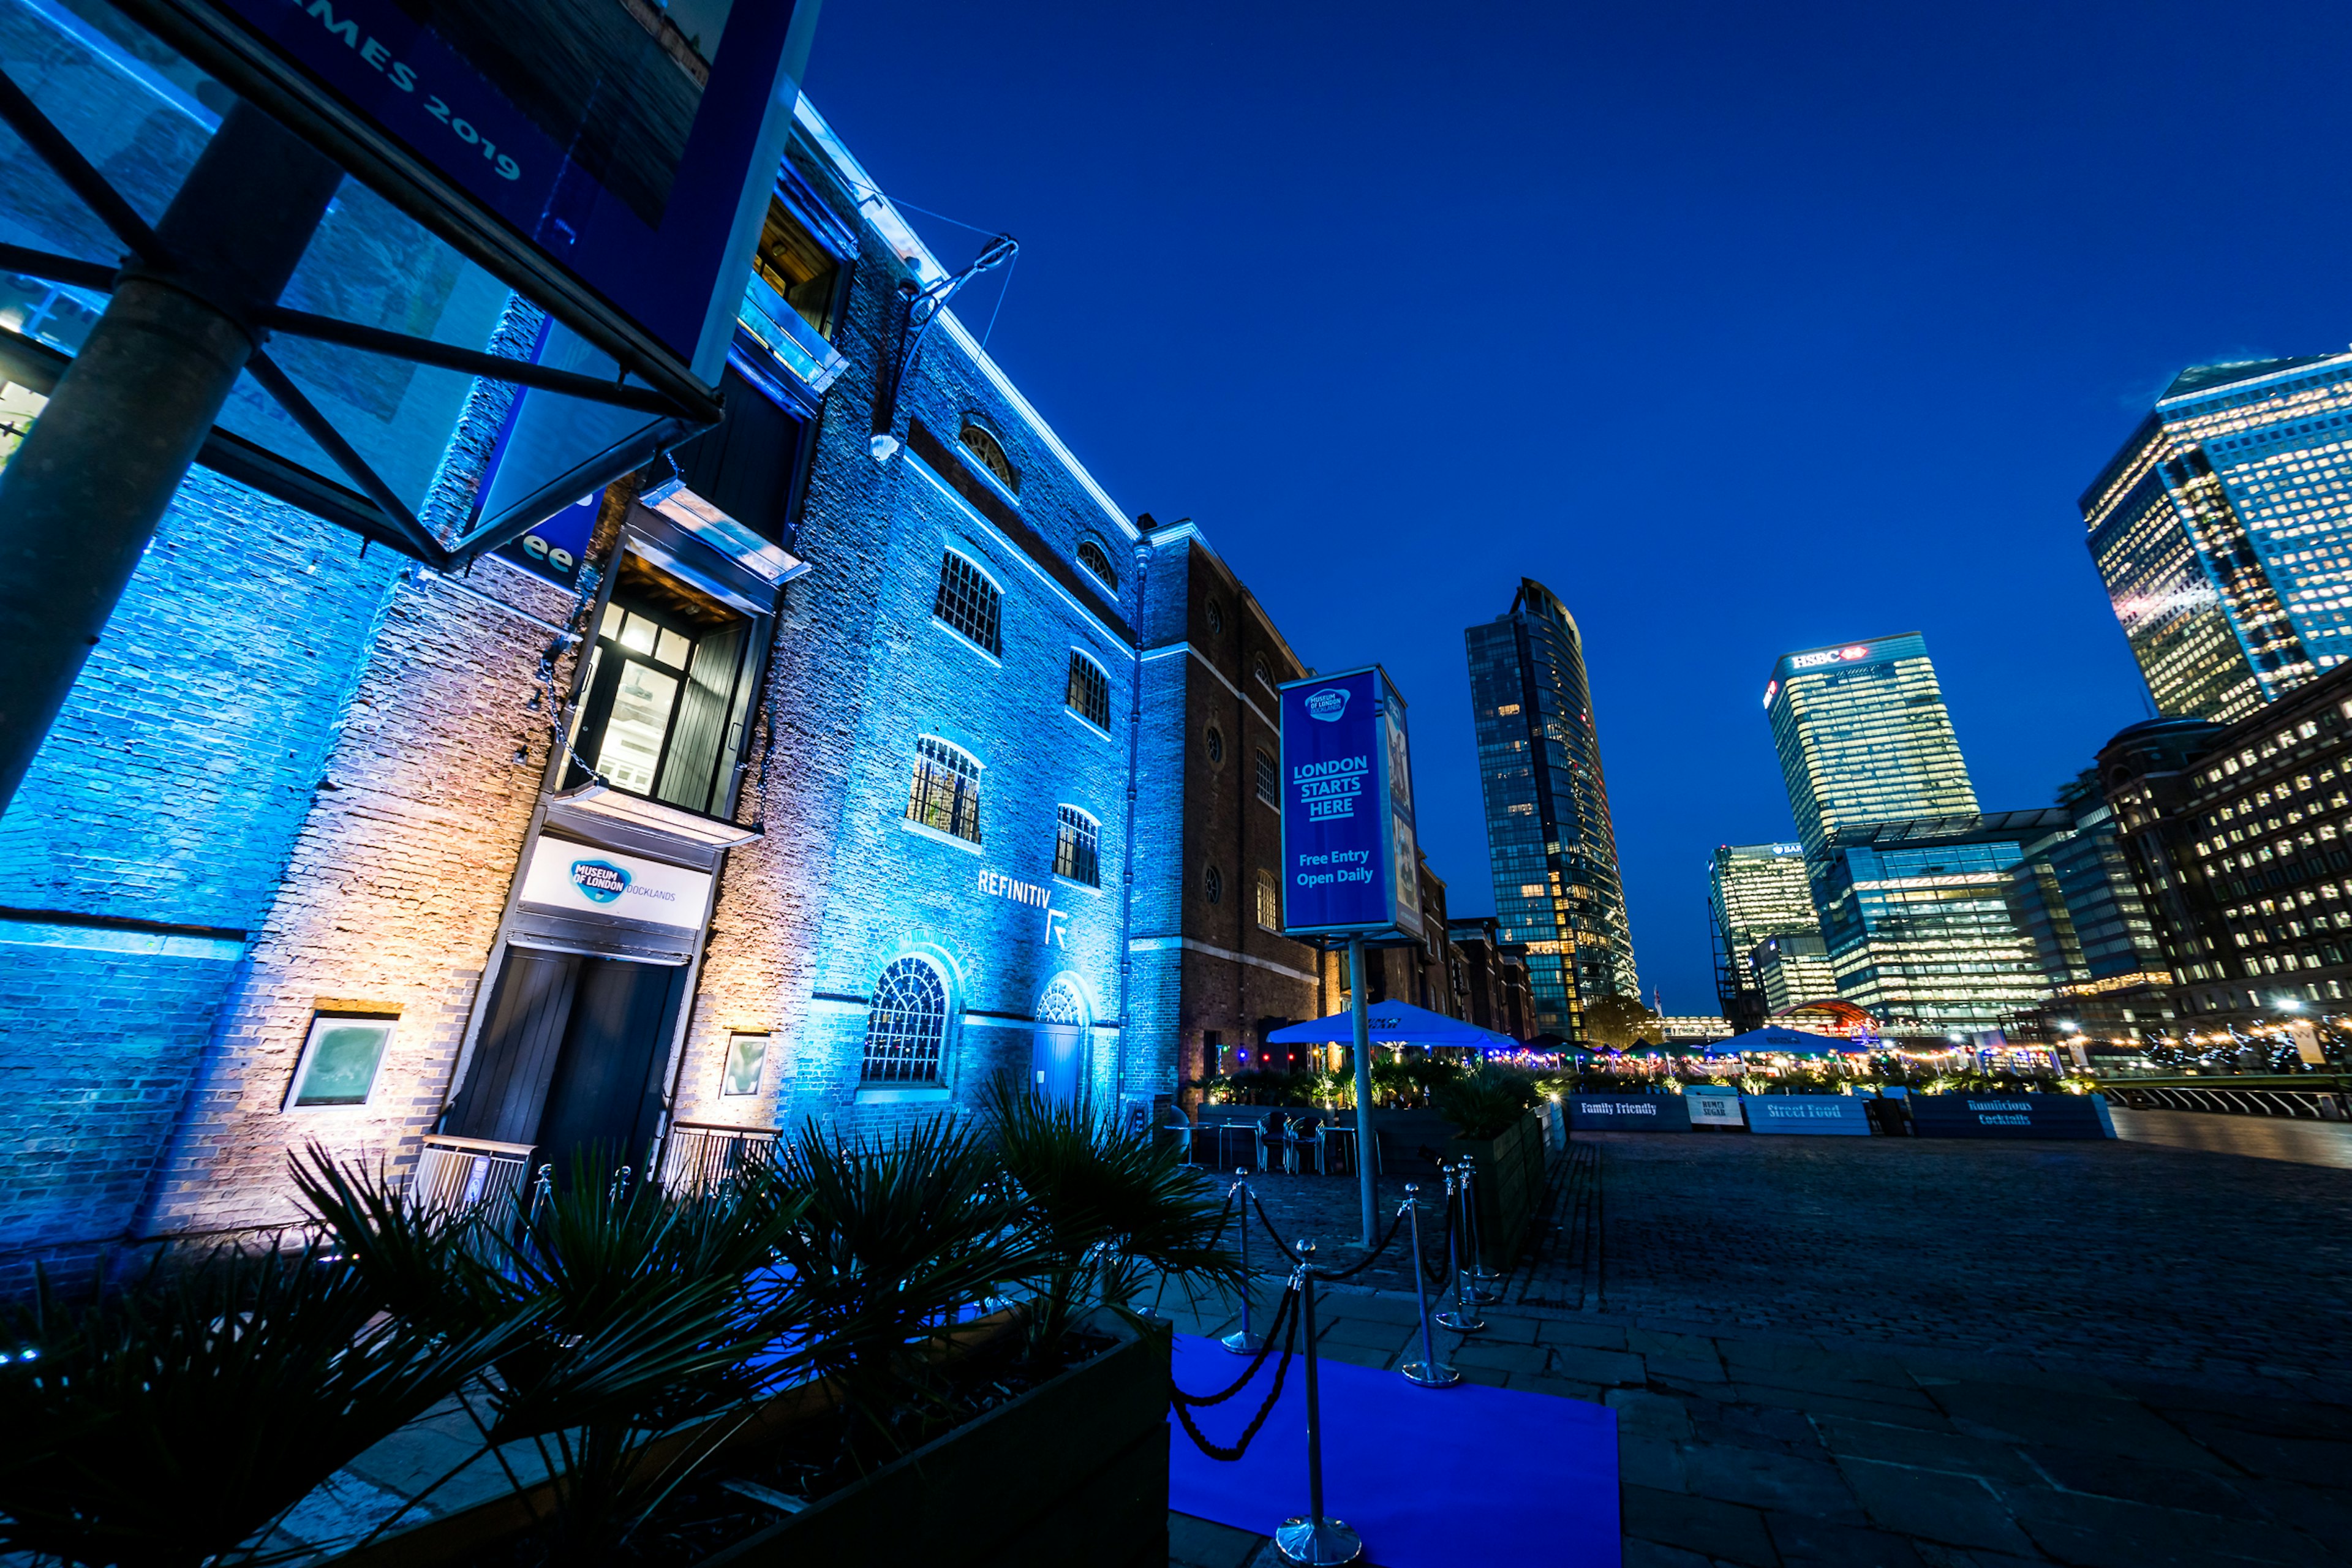 Award Ceremony Venues - Museum of London Docklands - Events in Whole Venue - Banner